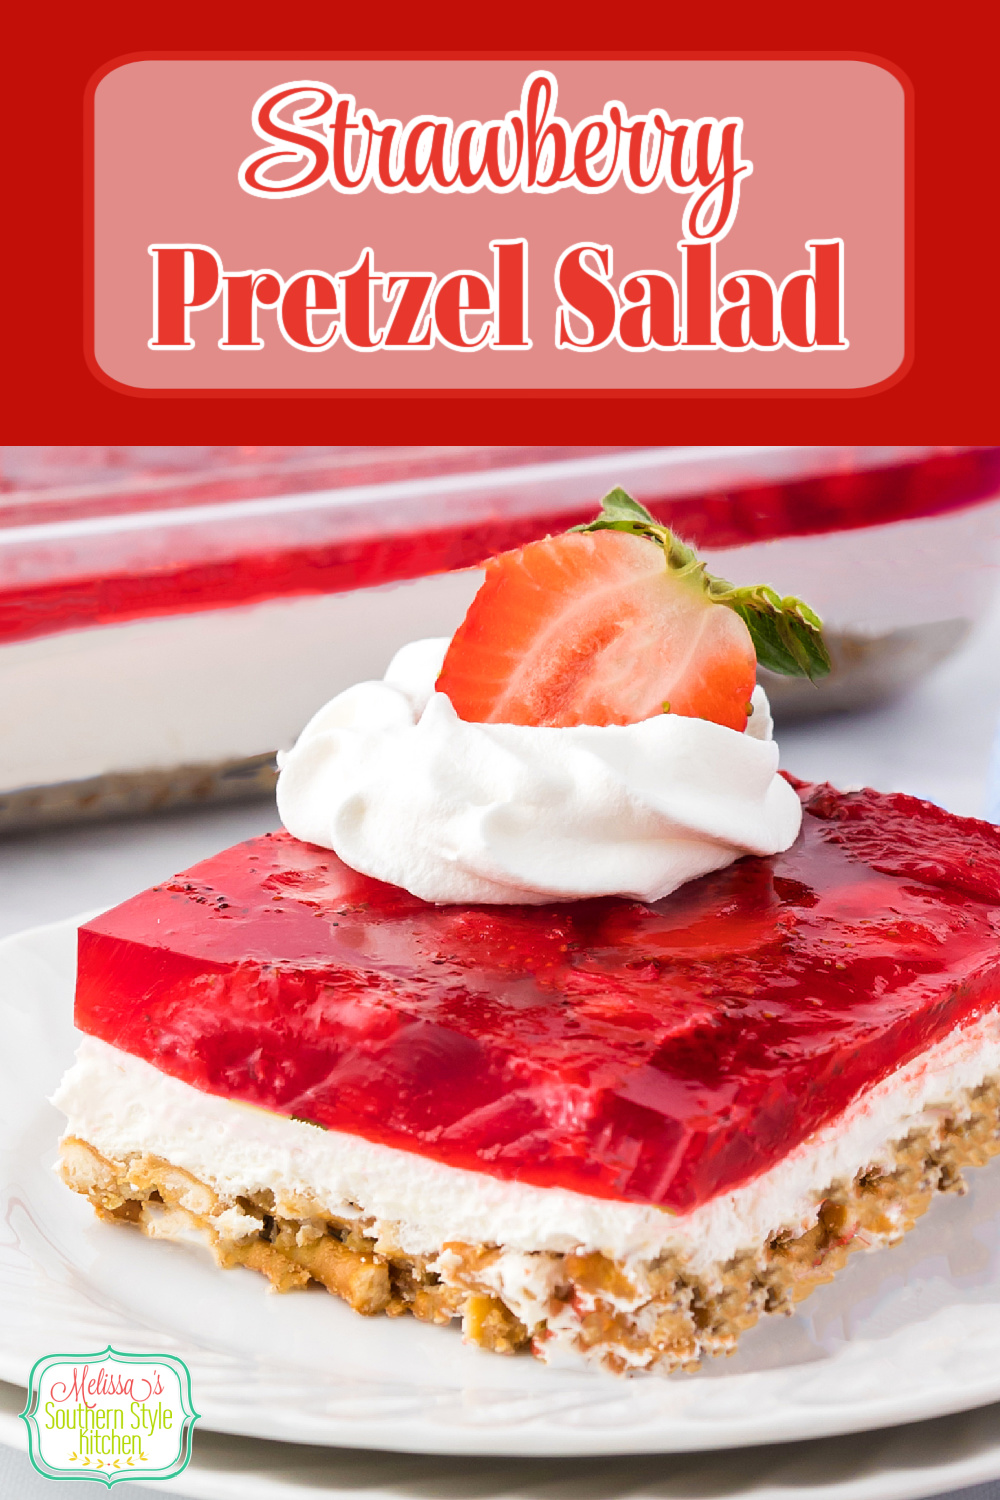 Strawberry Pretzel Salad features layers of strawberry jello, a cheesecake-like layer with a buttery pretzel pecan crust as the base. #strawberries #strawberrysalad #strawberryrecipes #salads #saladrecipes #strawberrydessertrecipes #easypretzelsalad